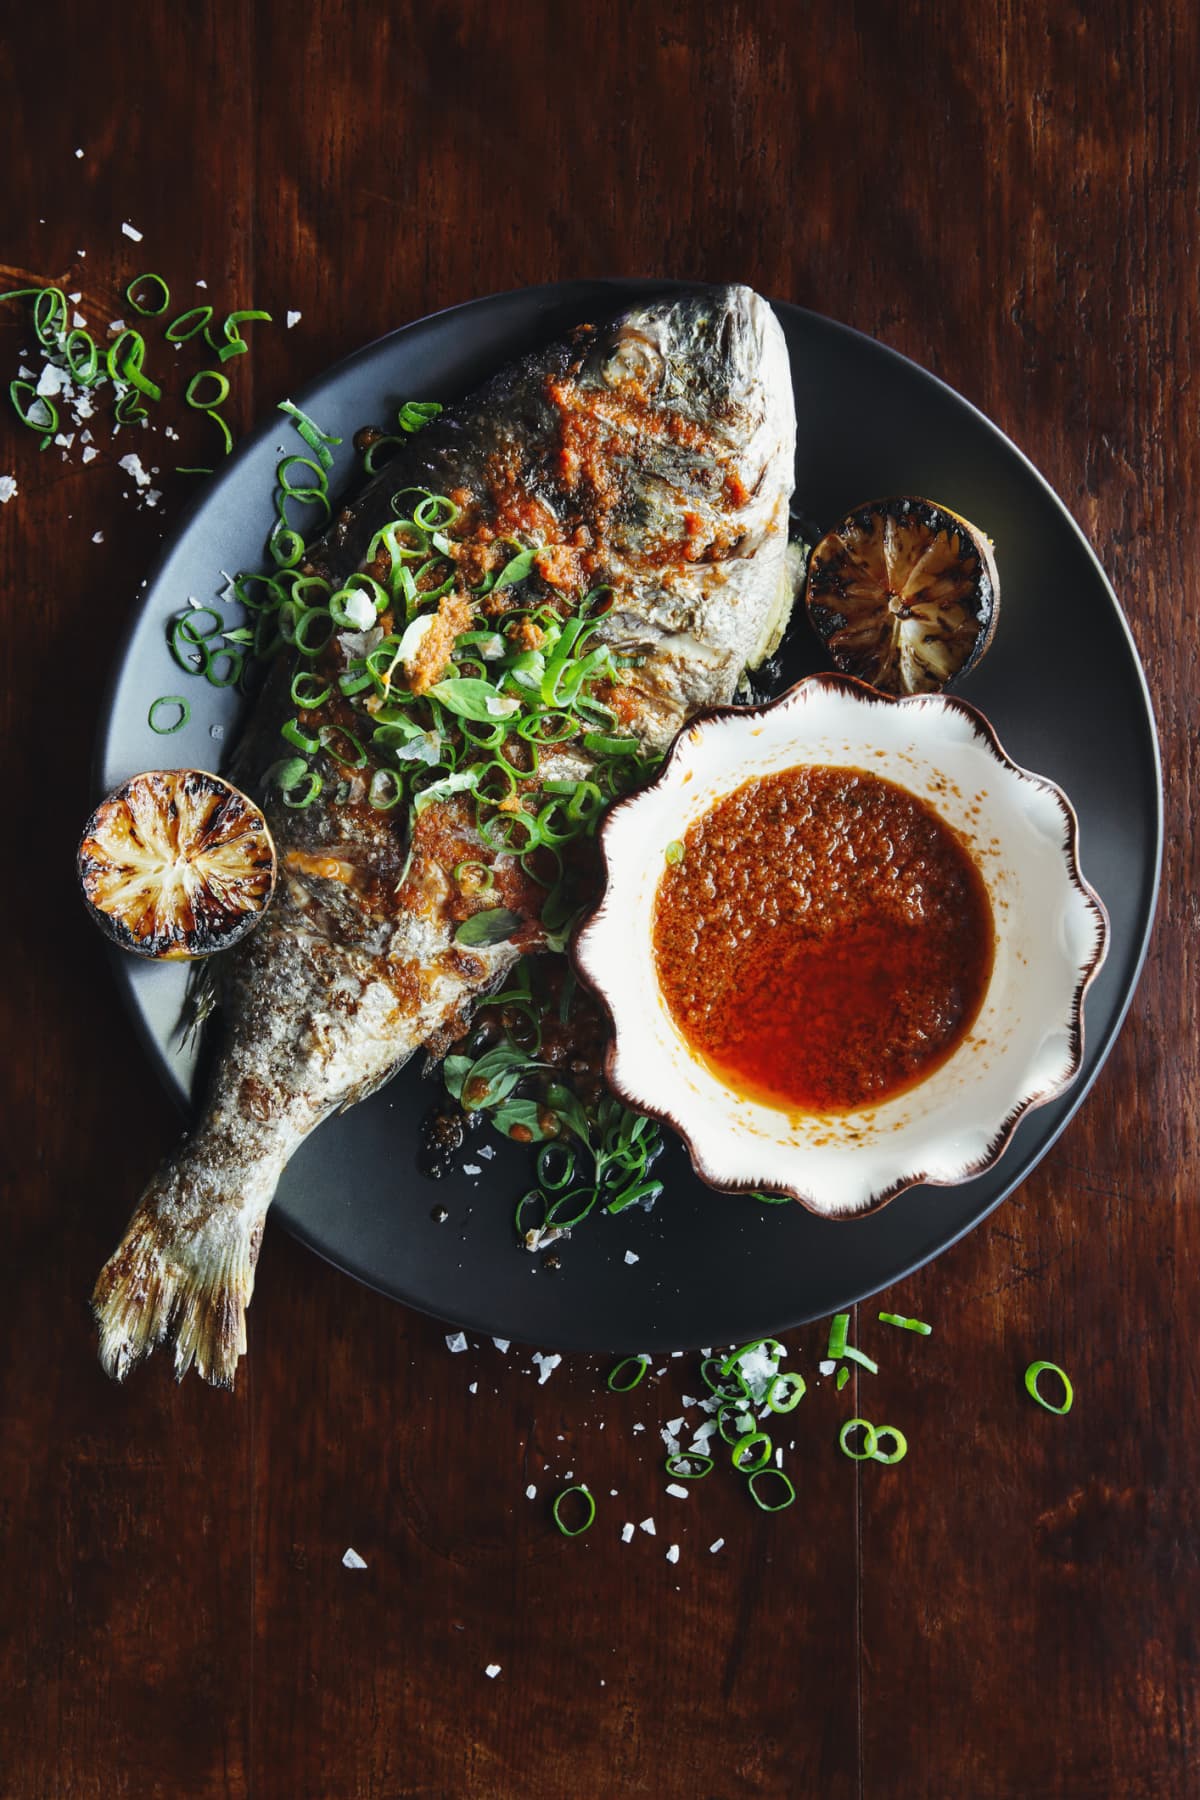 Barbecued whole snapper with sauce